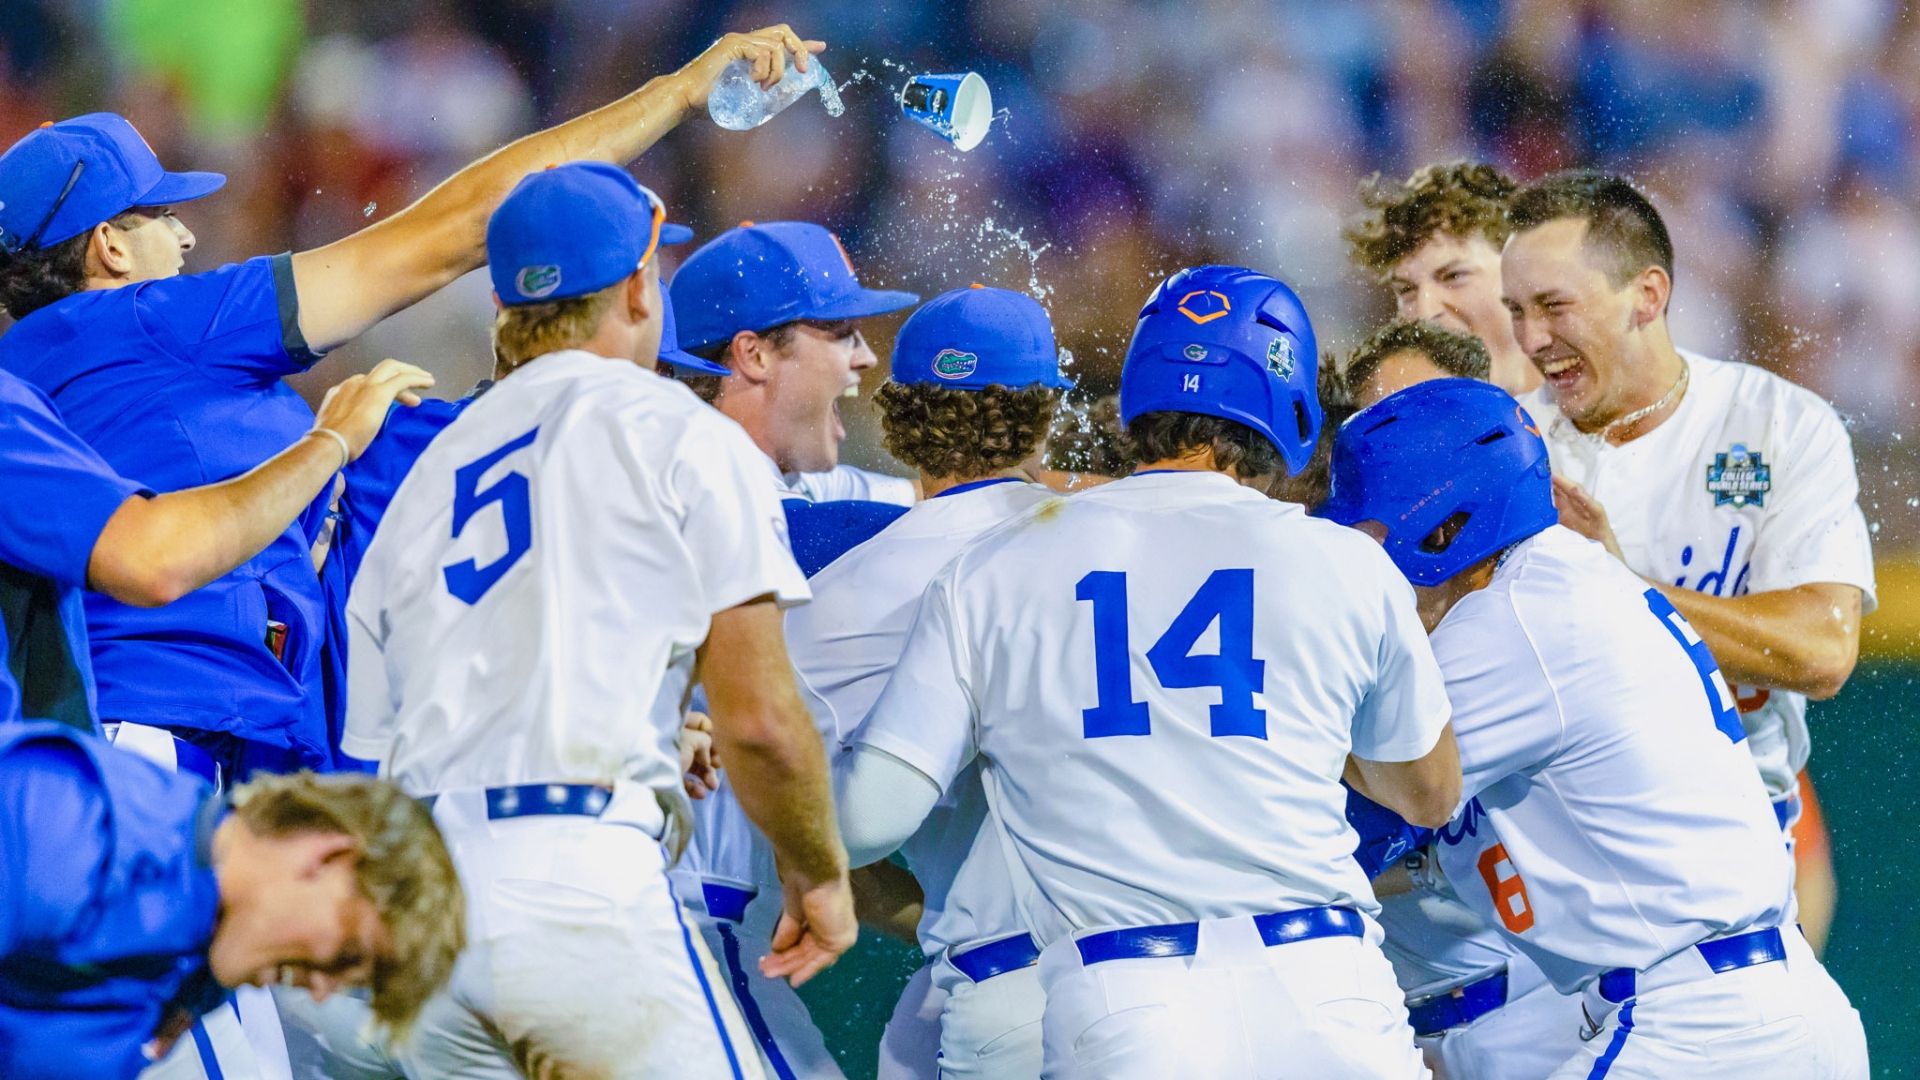 Gators take control of their CWS bracket with a 5-4 win over Oral Roberts